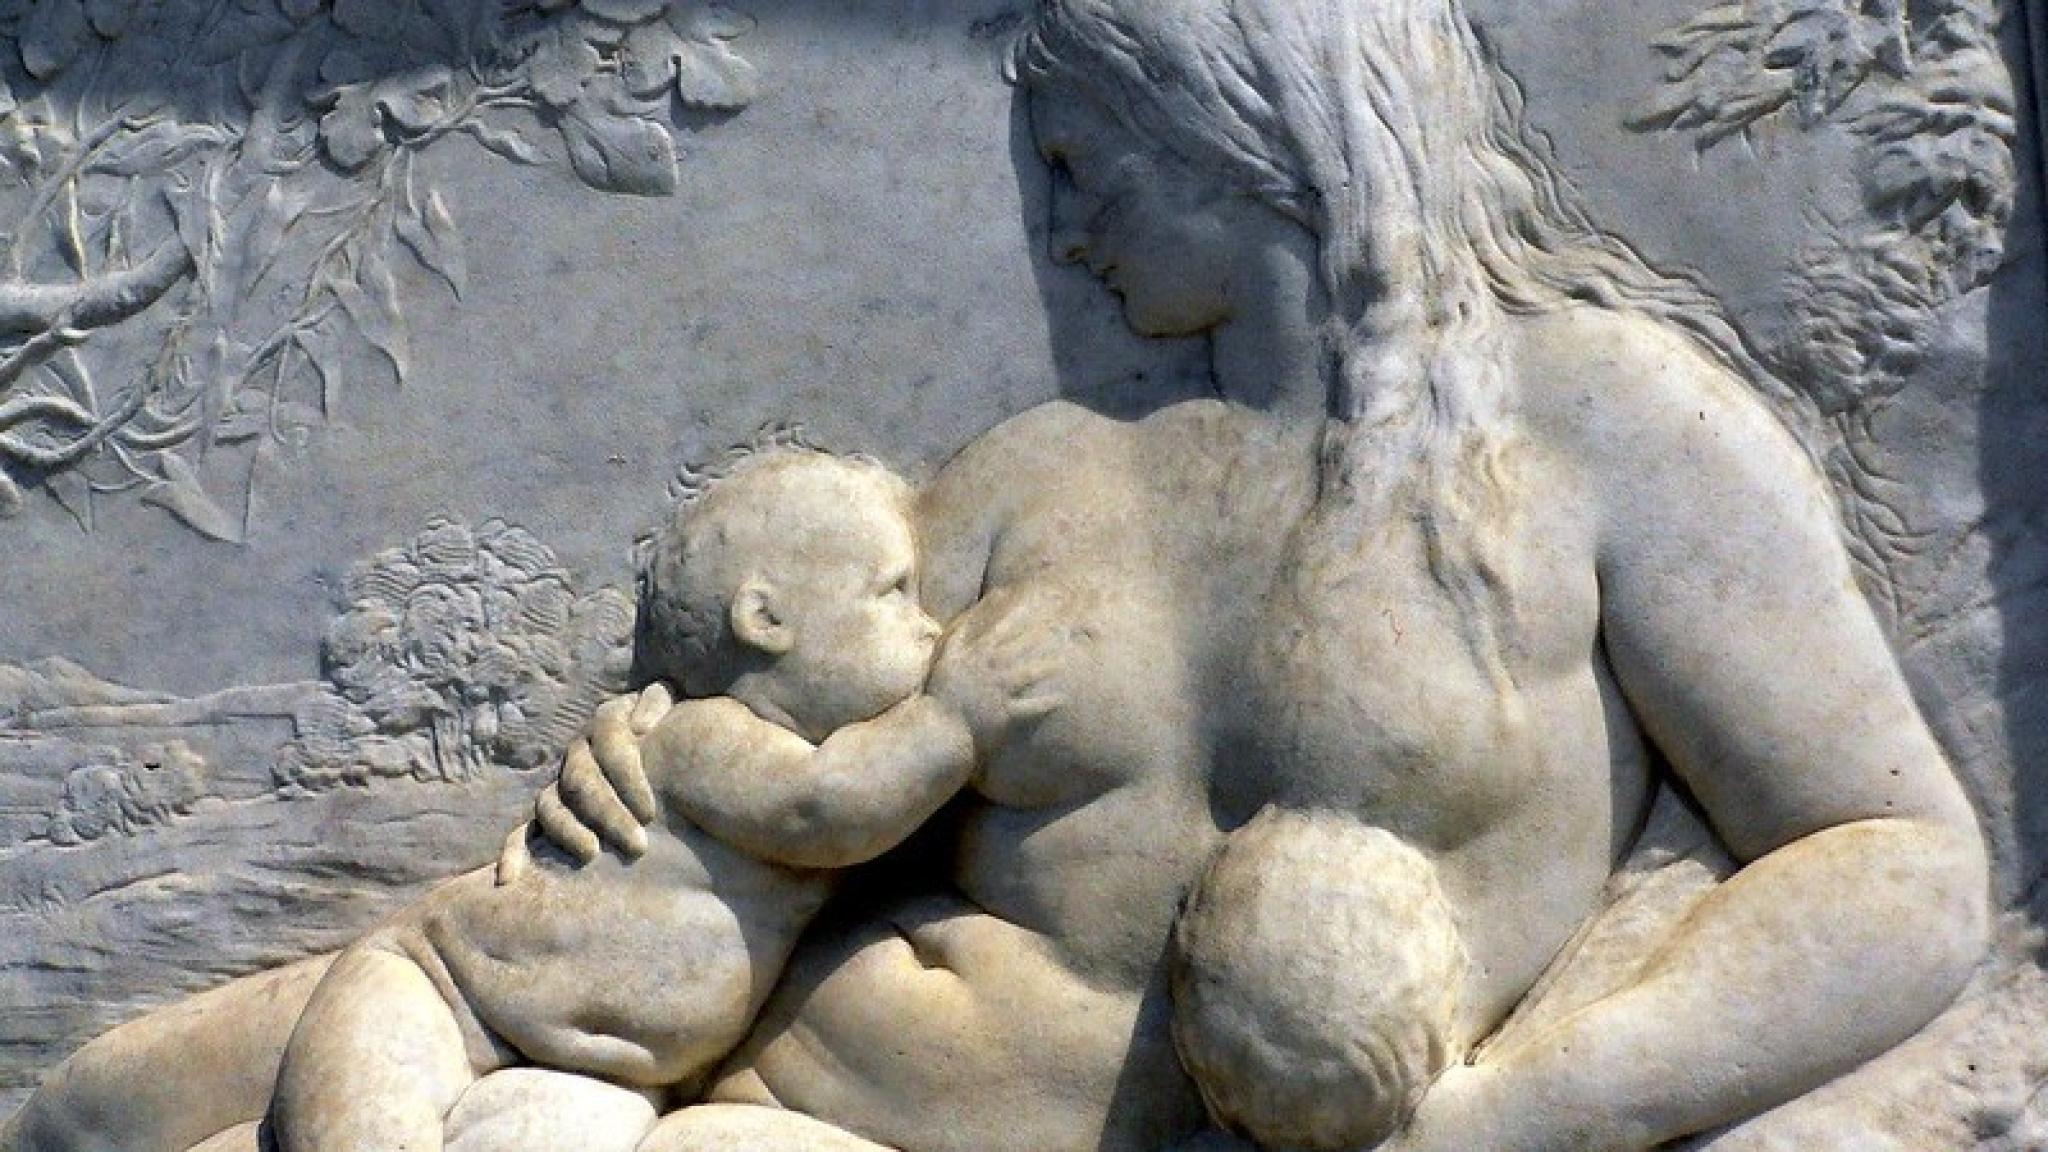 Image of sculpture of breastfeeding mother by 3dom at https://flic.kr/p/4TBPYZ (CC BY-NC 2.0)